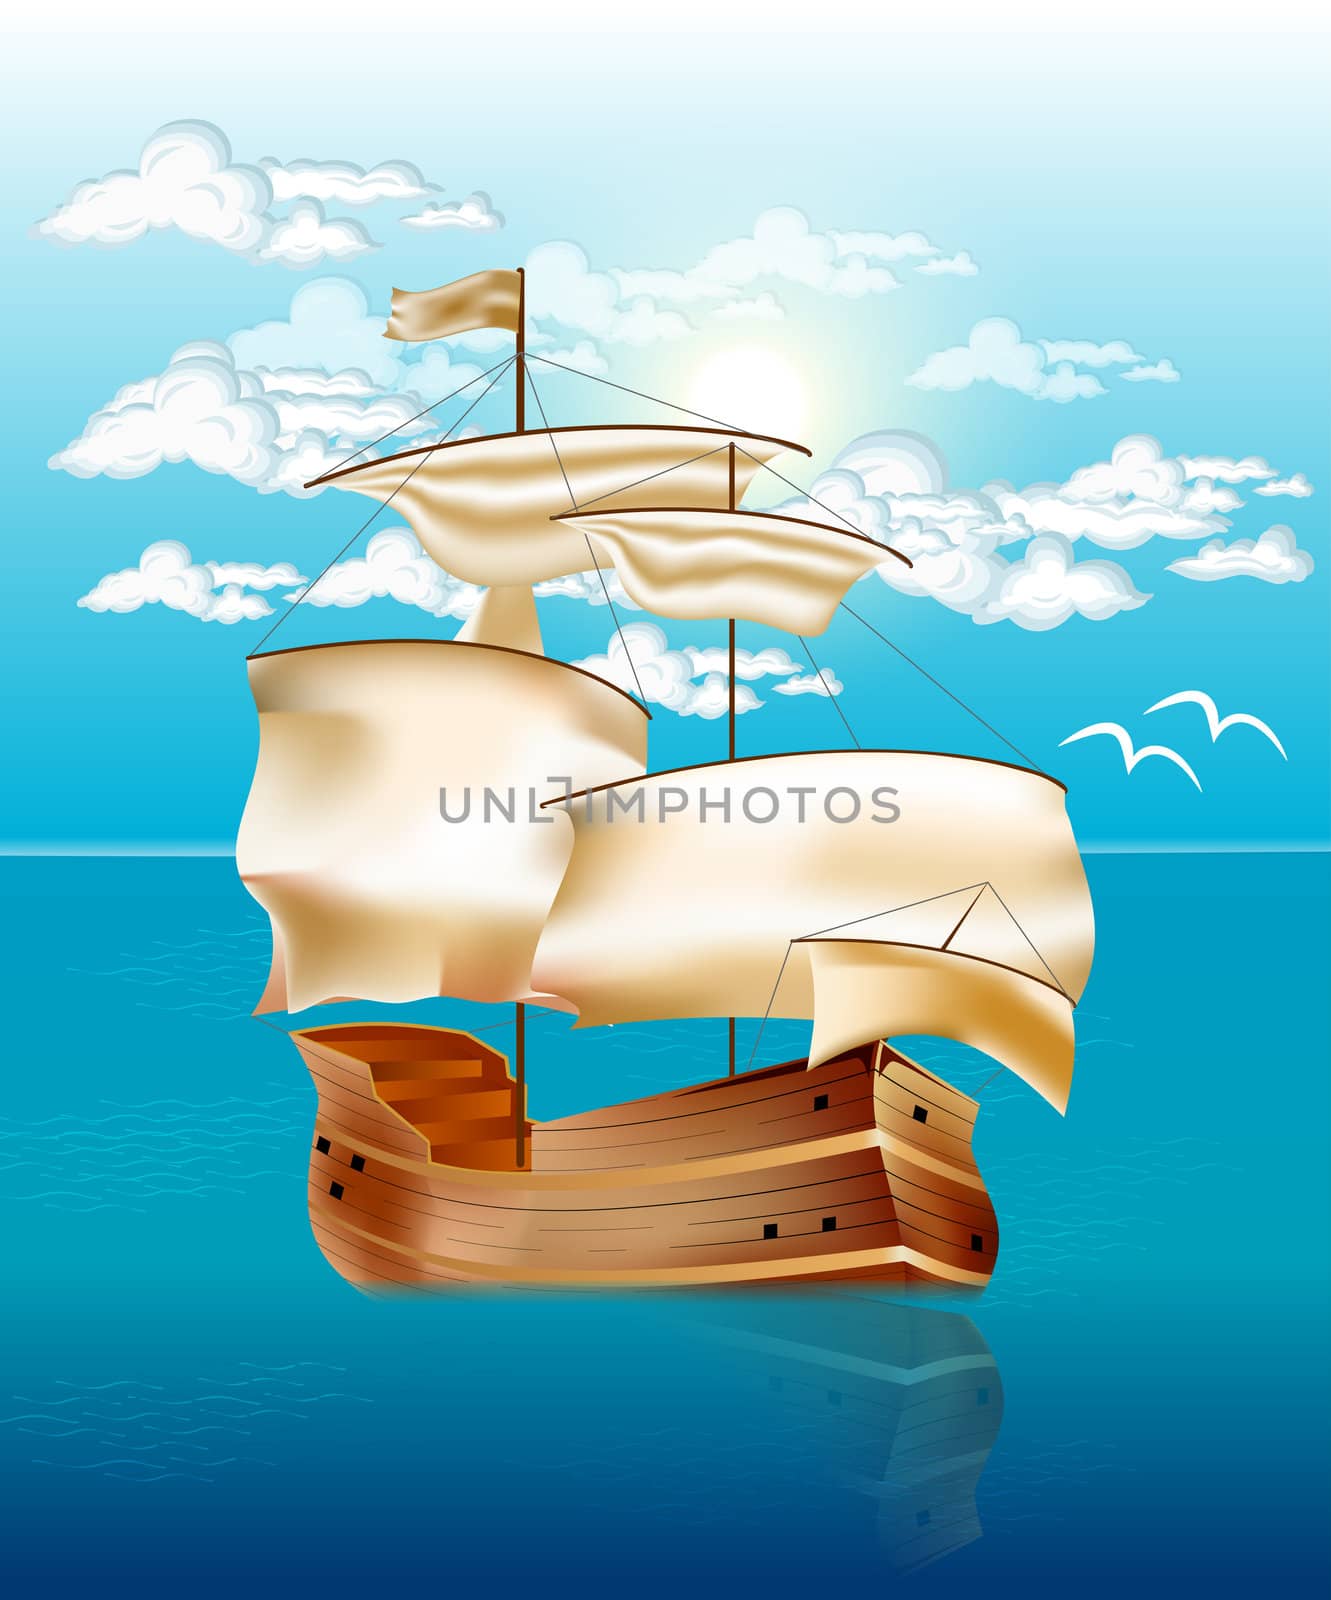 Ocean illustration with cloudy sky and a sailboat.